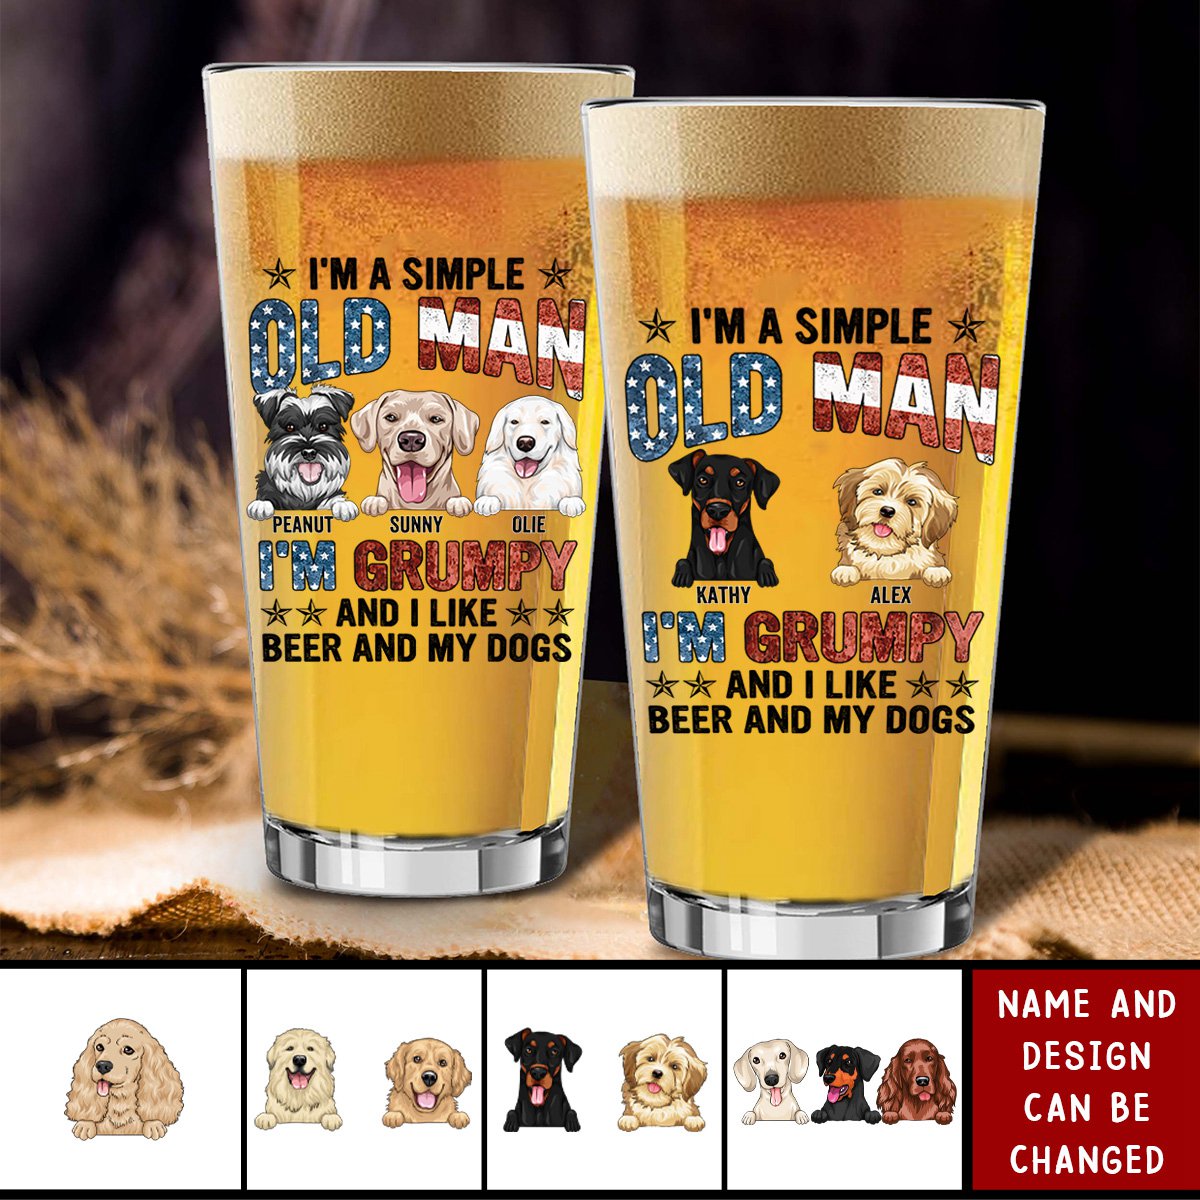 I'm Grumpy And I Like Beer And My Dog - Personalized Beer Glass